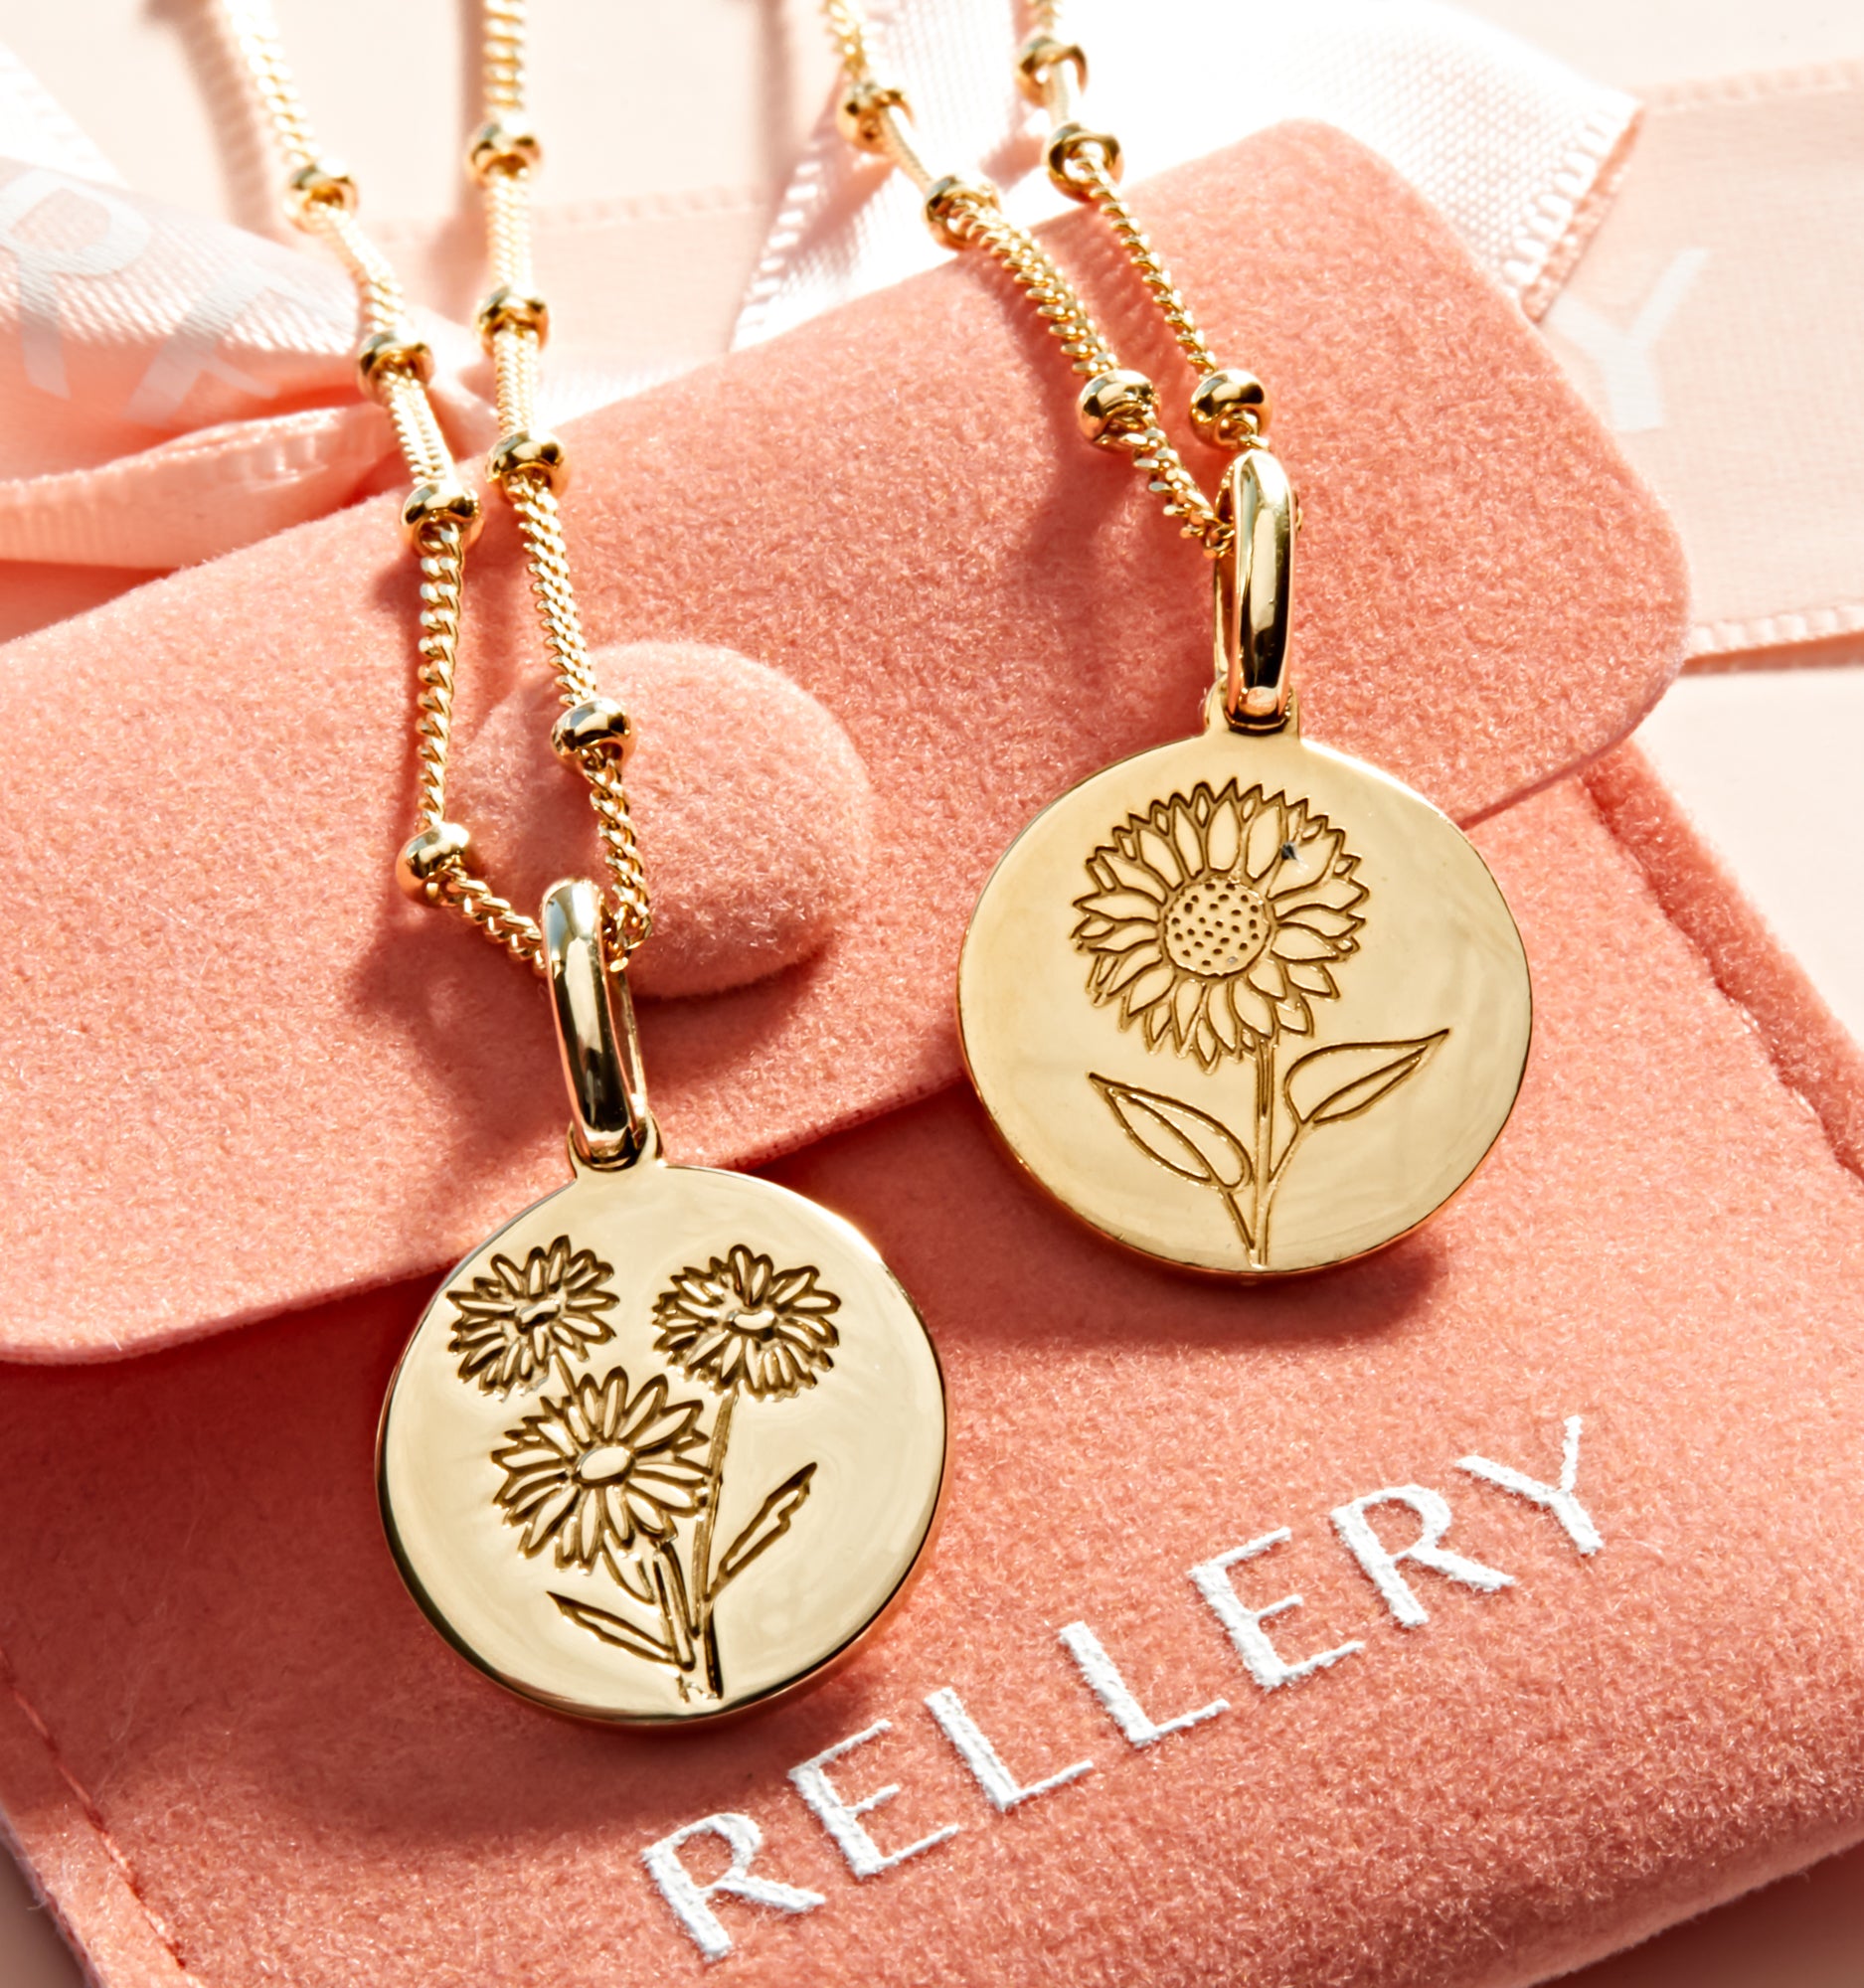 Initial Necklace, Letter Necklace – Rellery